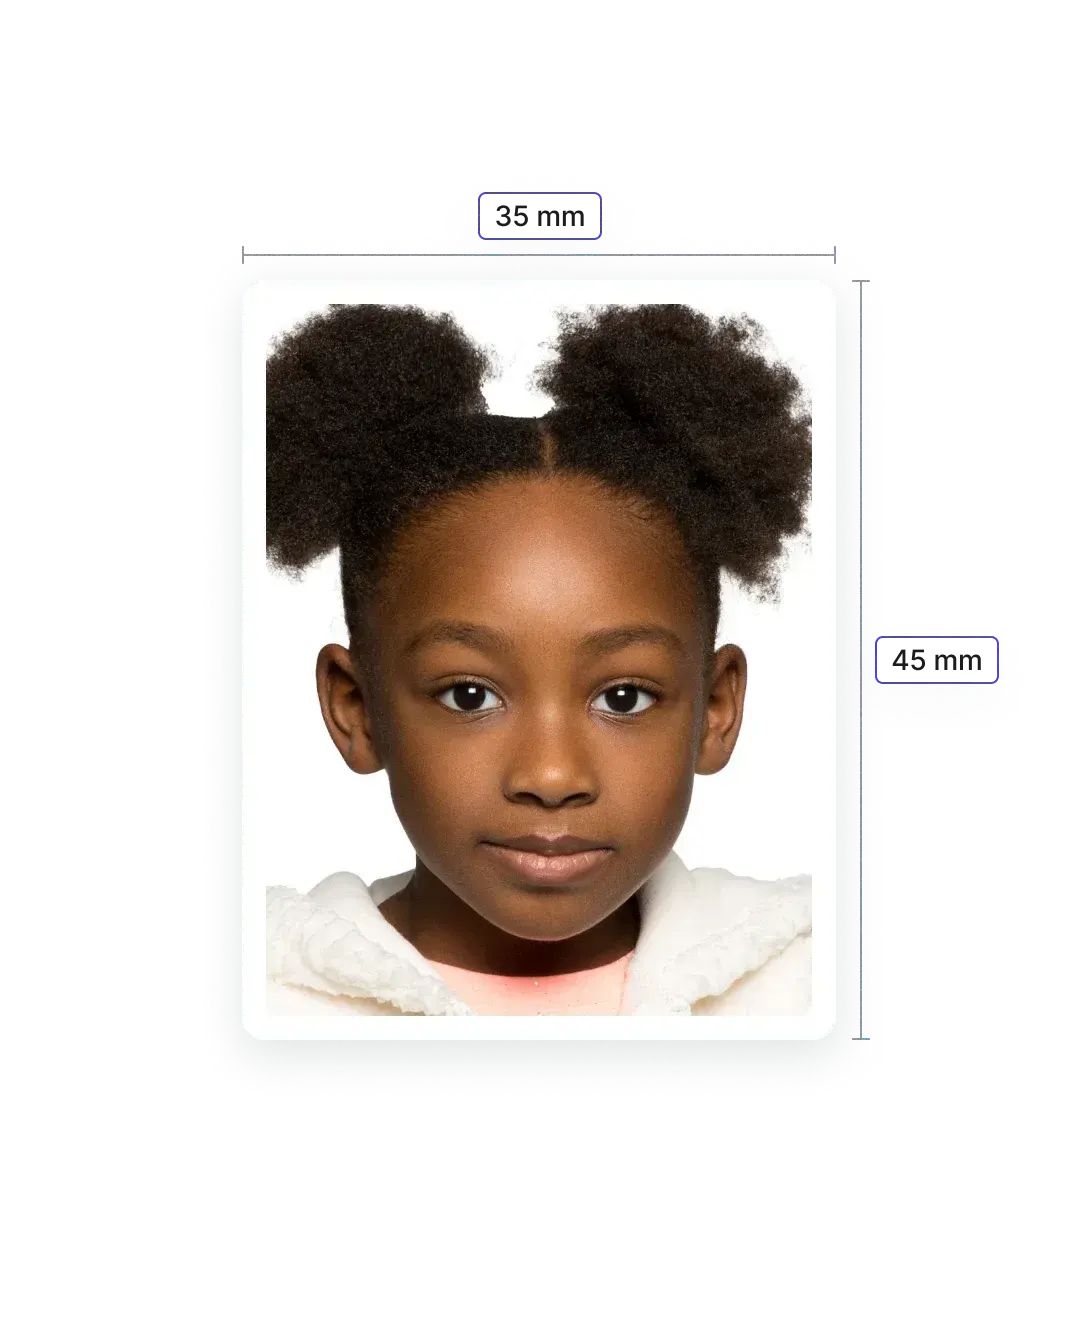 South African Baby Passport Photo - Size and Requirements